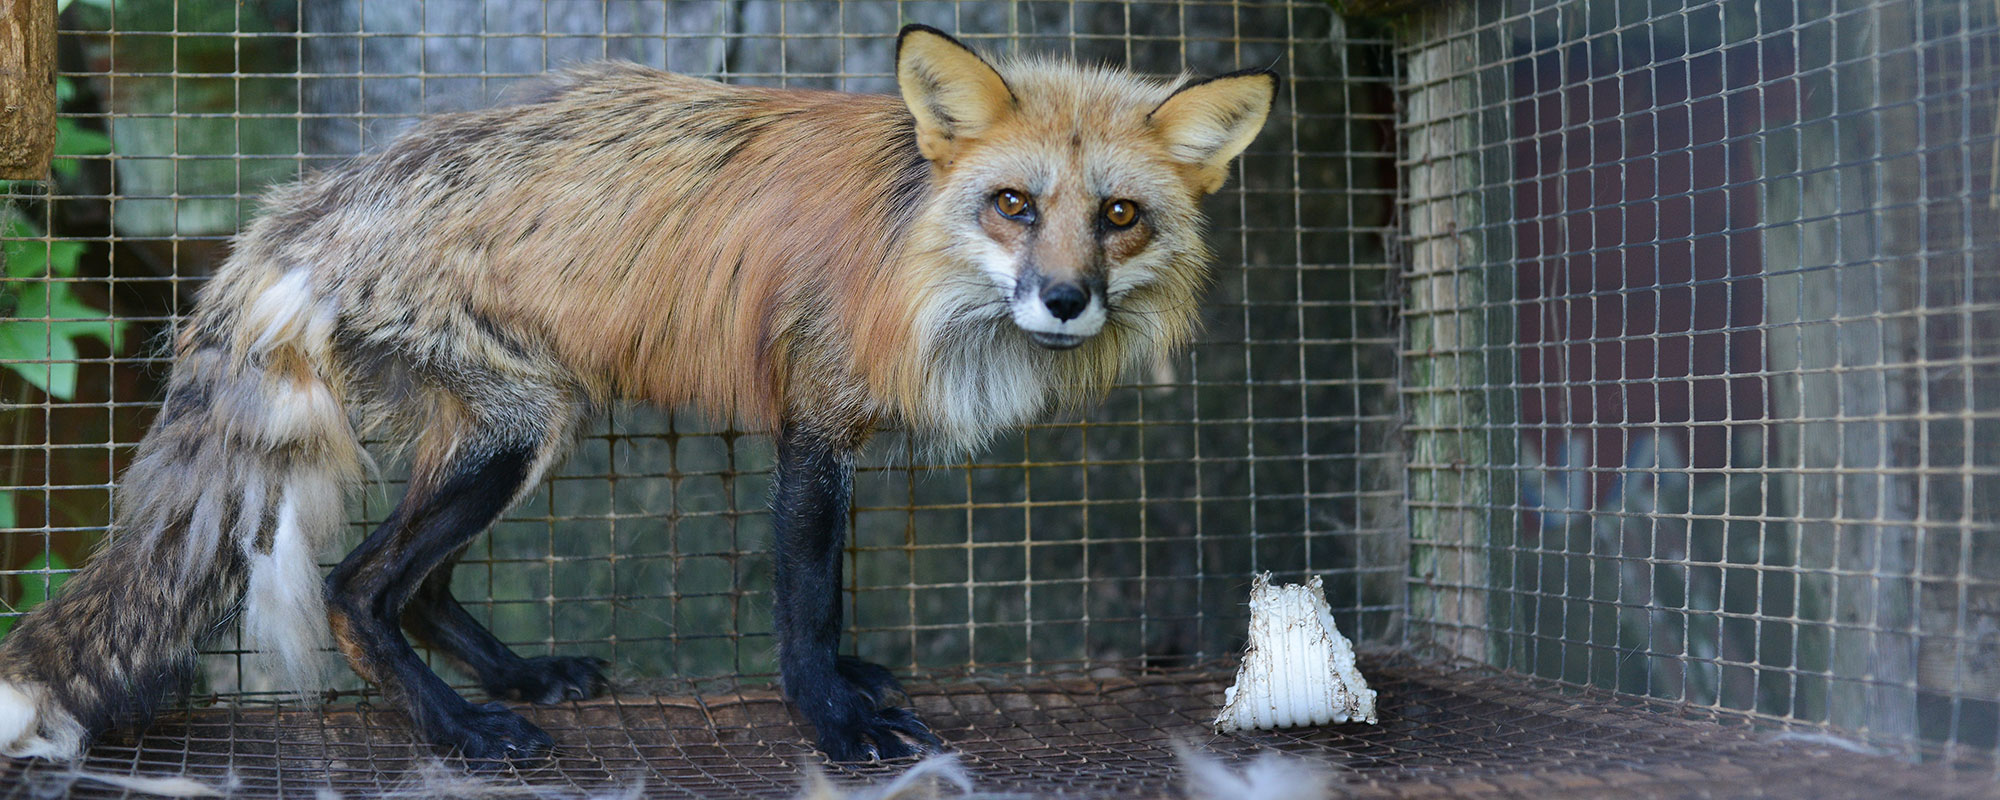 A photo of a fox in a cage